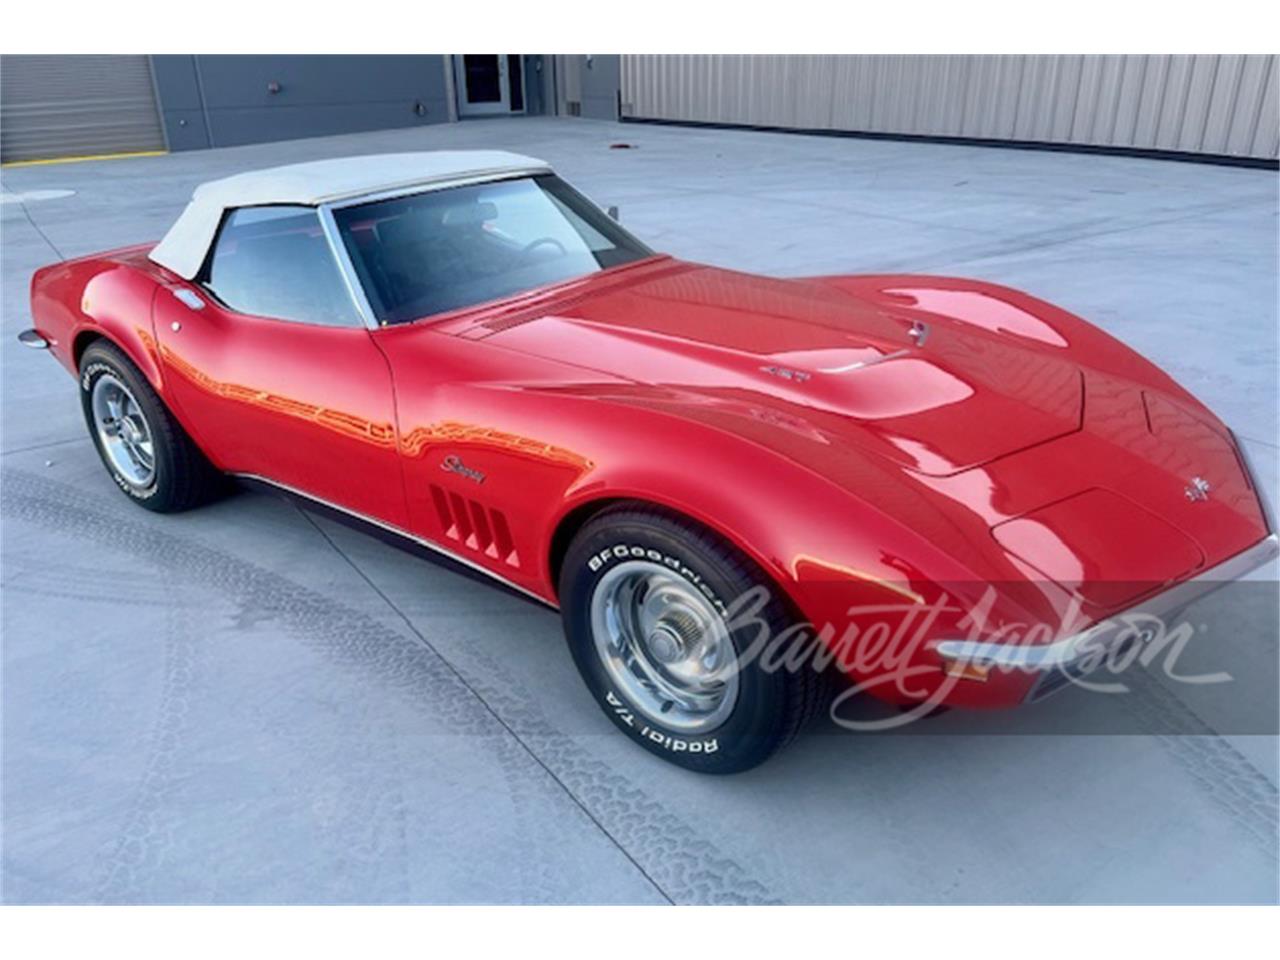 For Sale at Auction: 1969 Chevrolet Corvette in Scottsdale, Arizona for sale in Scottsdale, AZ